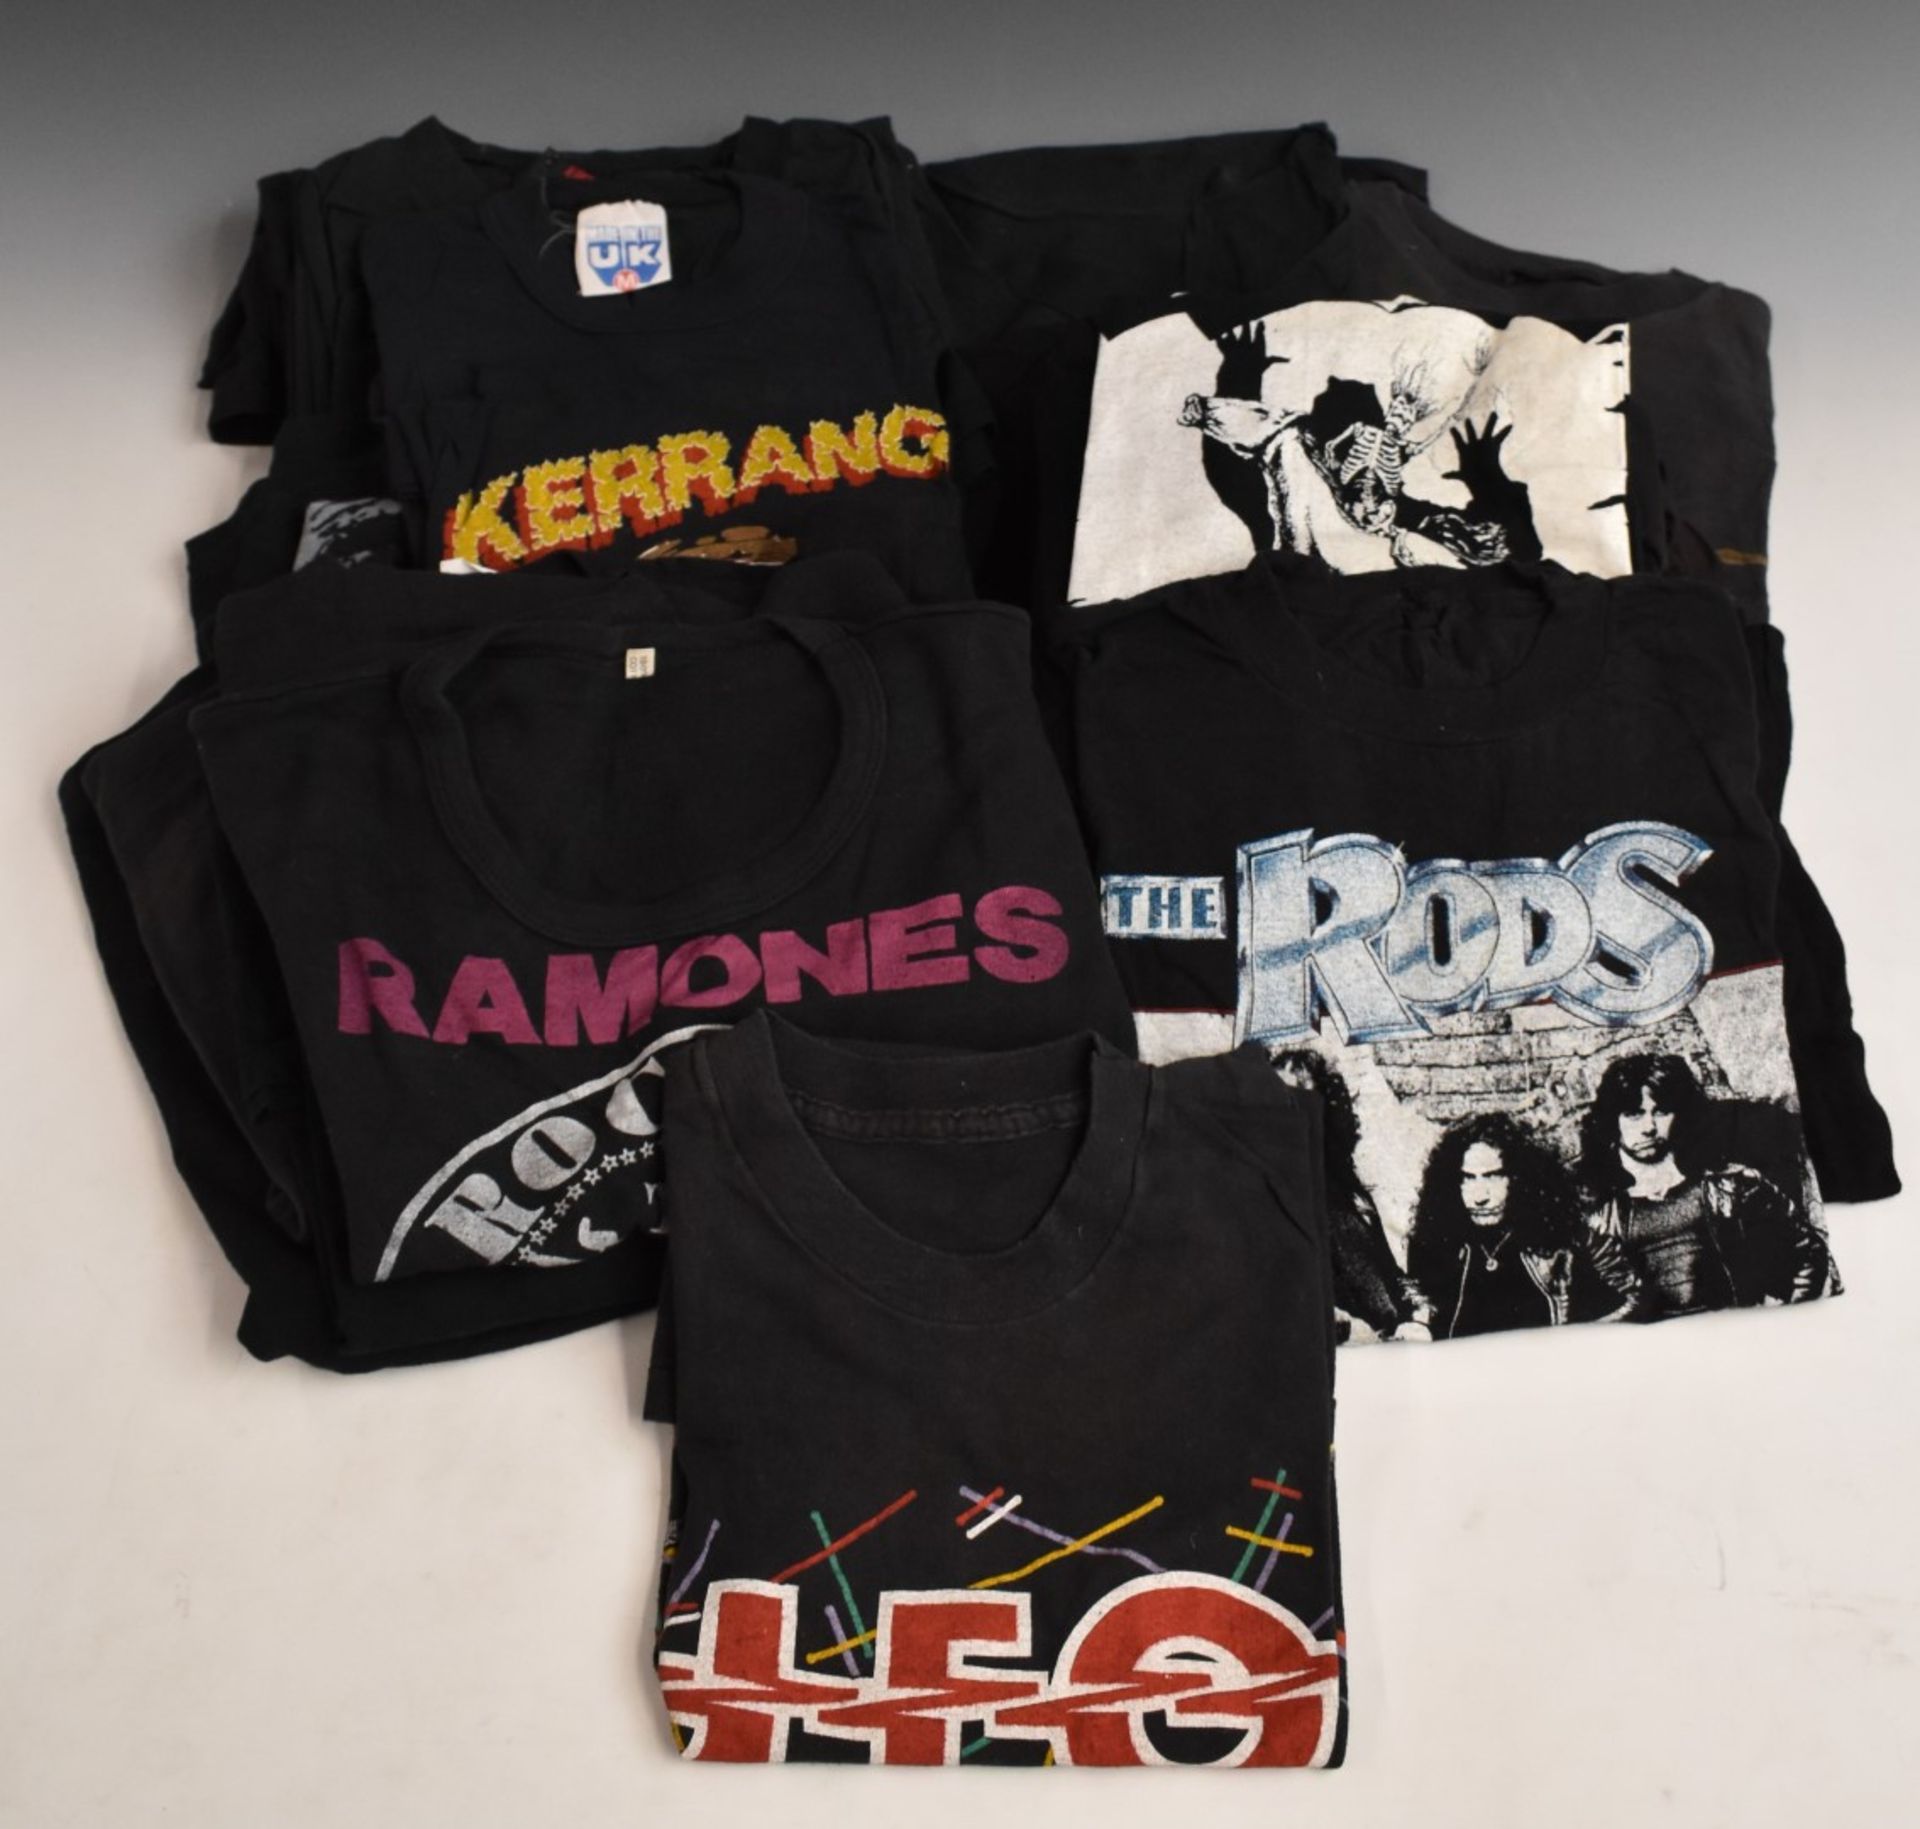 Twenty band T-shirts, to include Iron Maiden, Crobar, The Rods, Ramones, UK Subs and Stiff Records